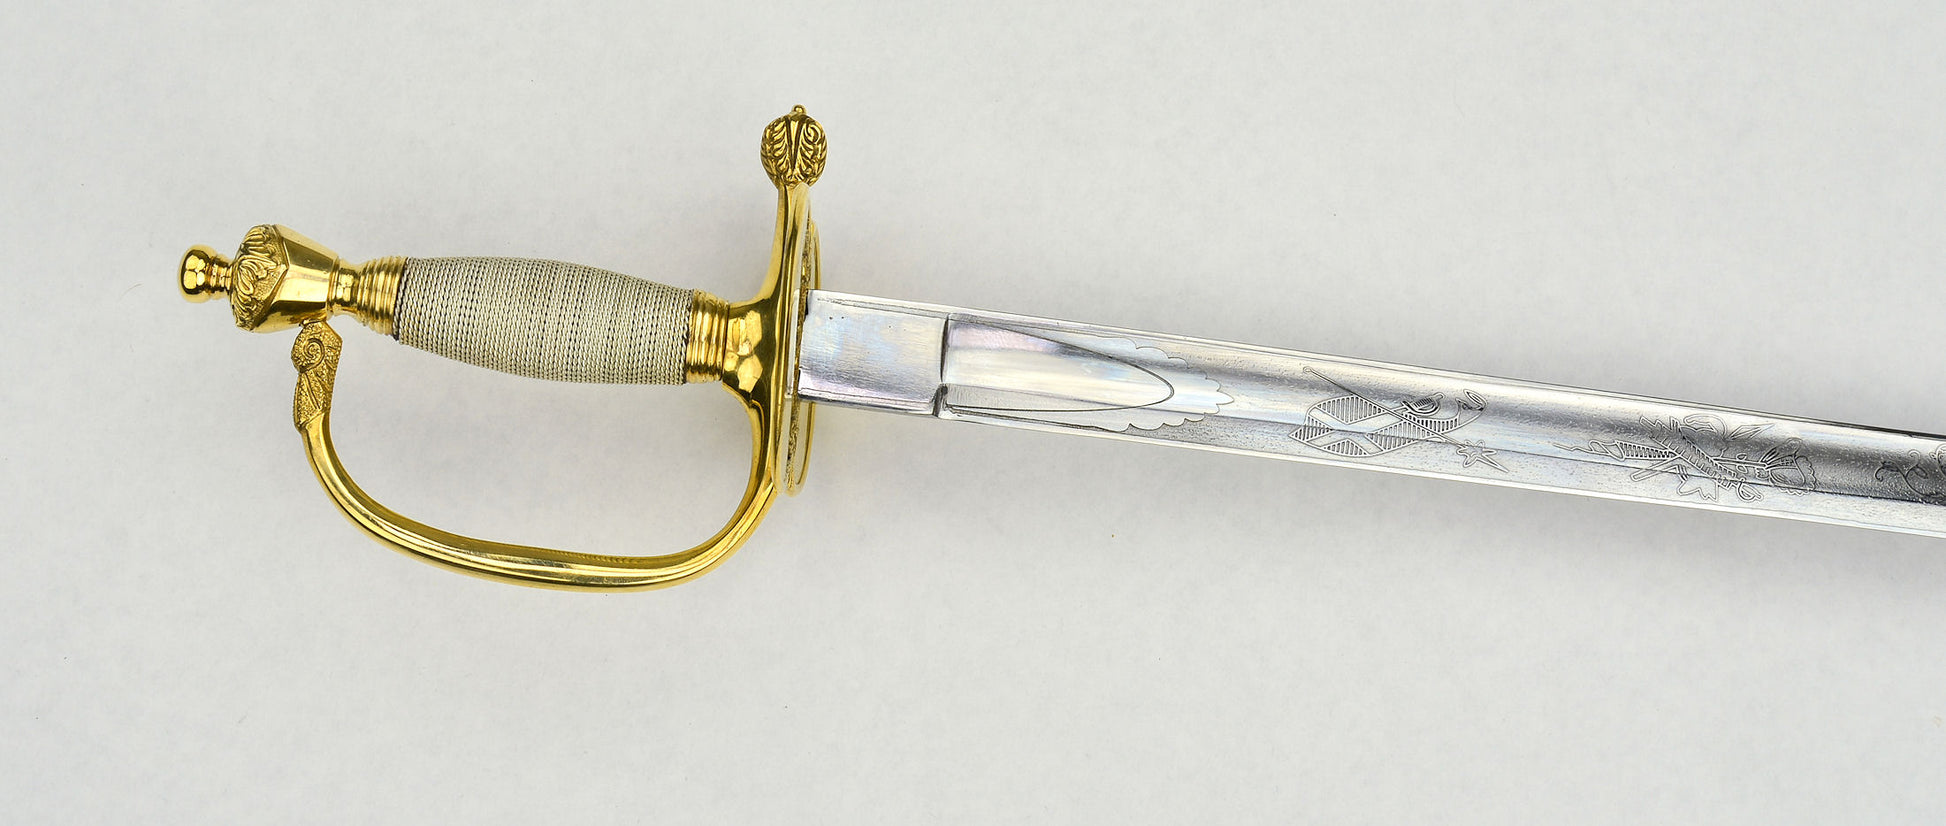 1796 Pattern British Infantry Sword - with folding guard, silver grip and decorated blade